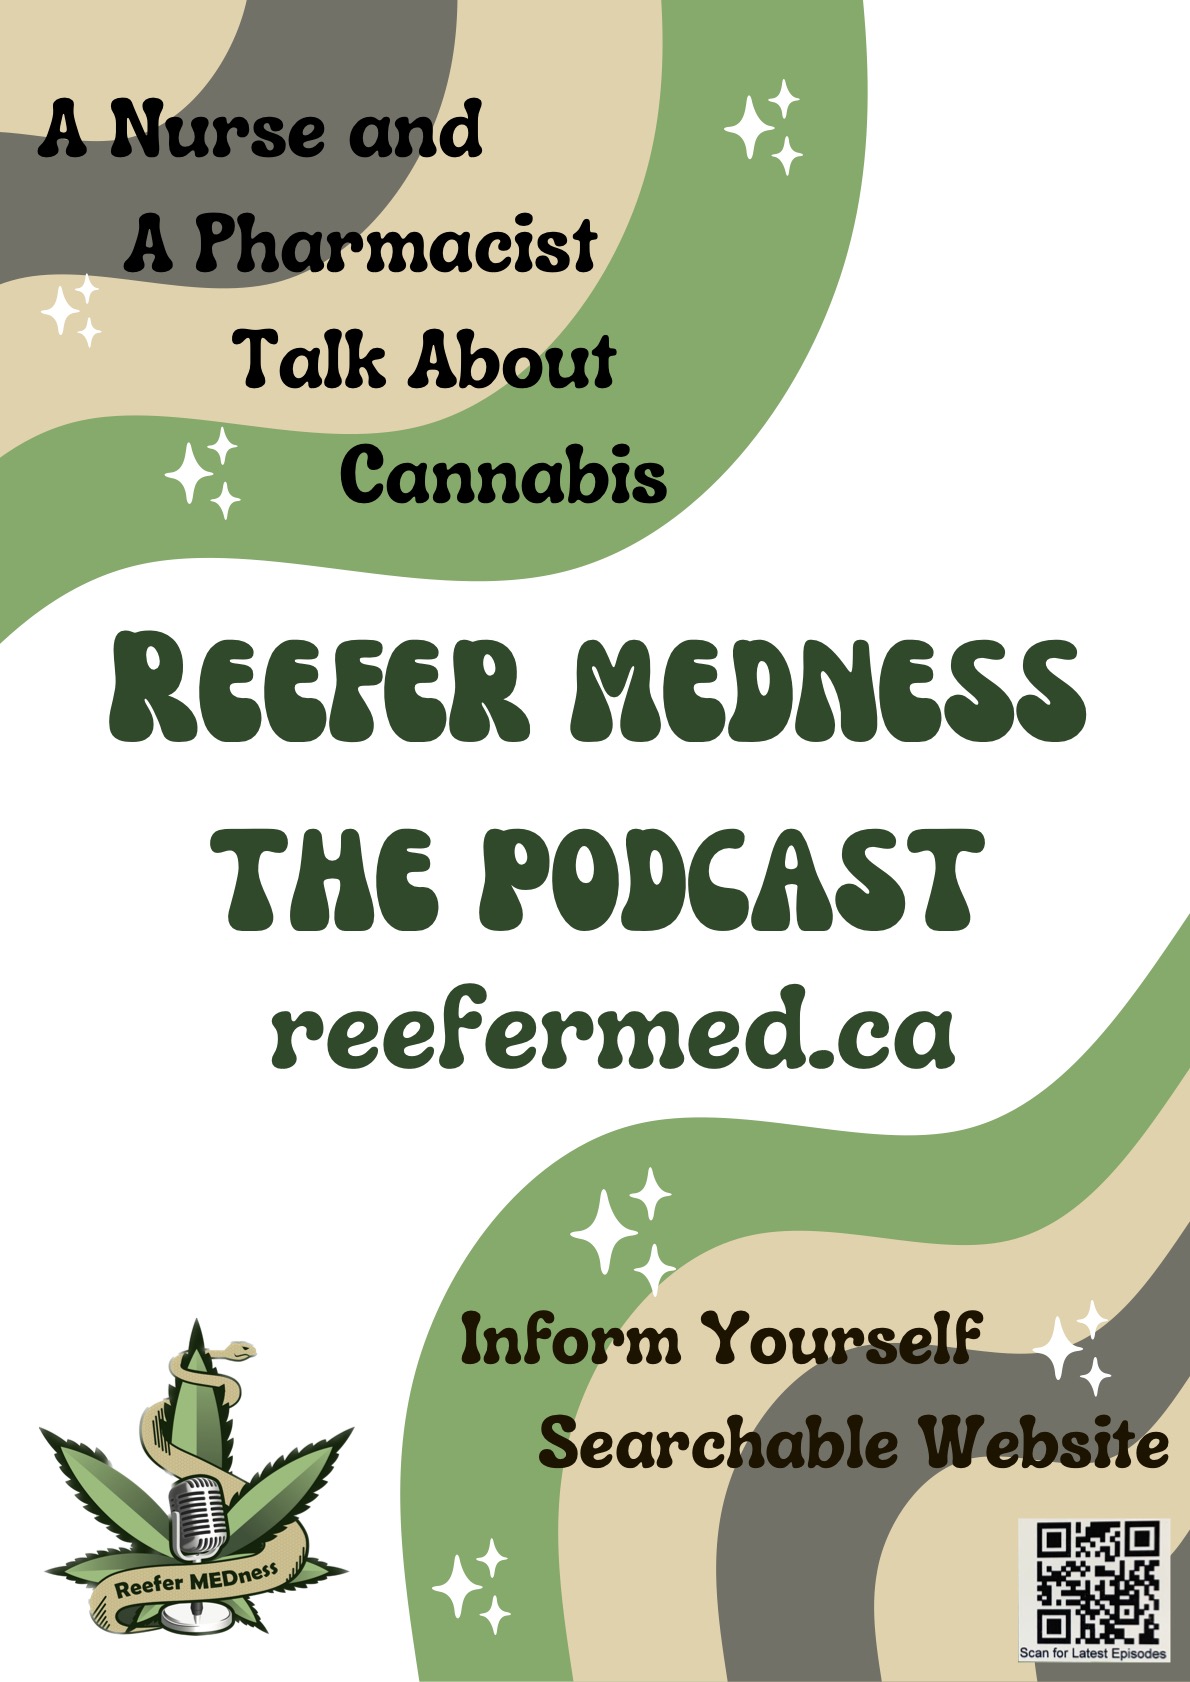 Reefermed info poster 8